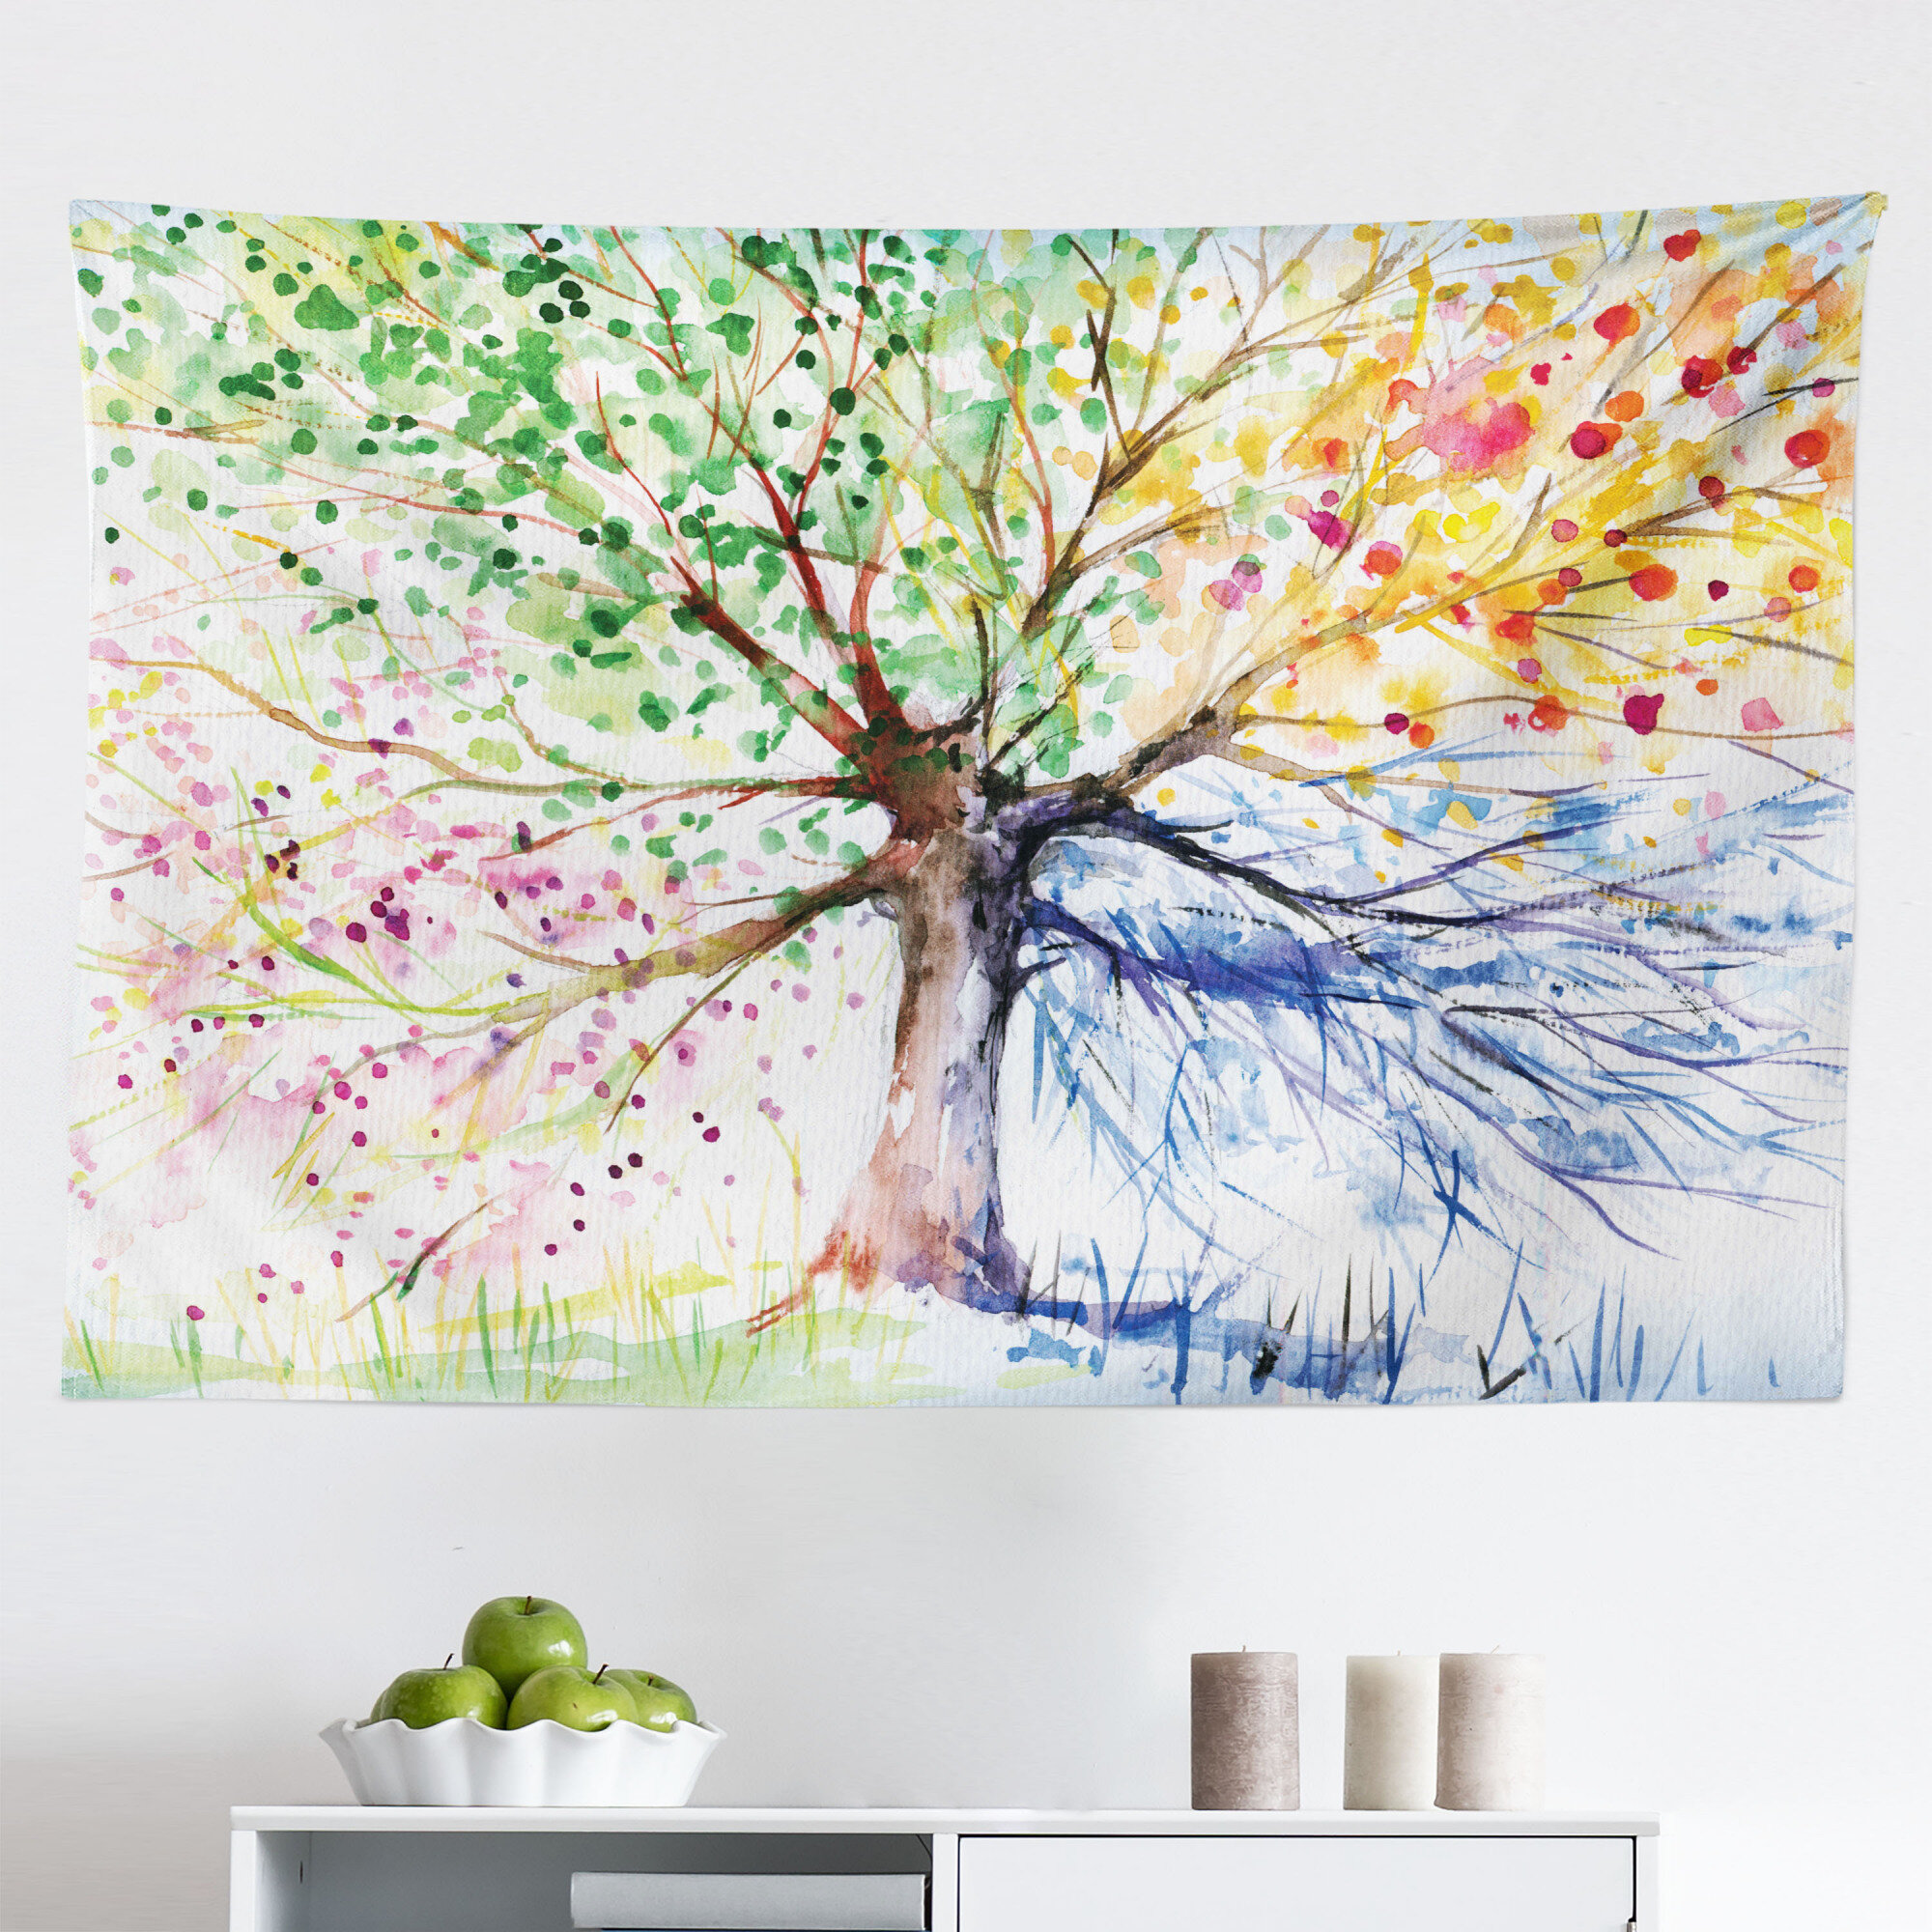 Flower Tapestry Watercolor Nature Print Wall Hanging Decor